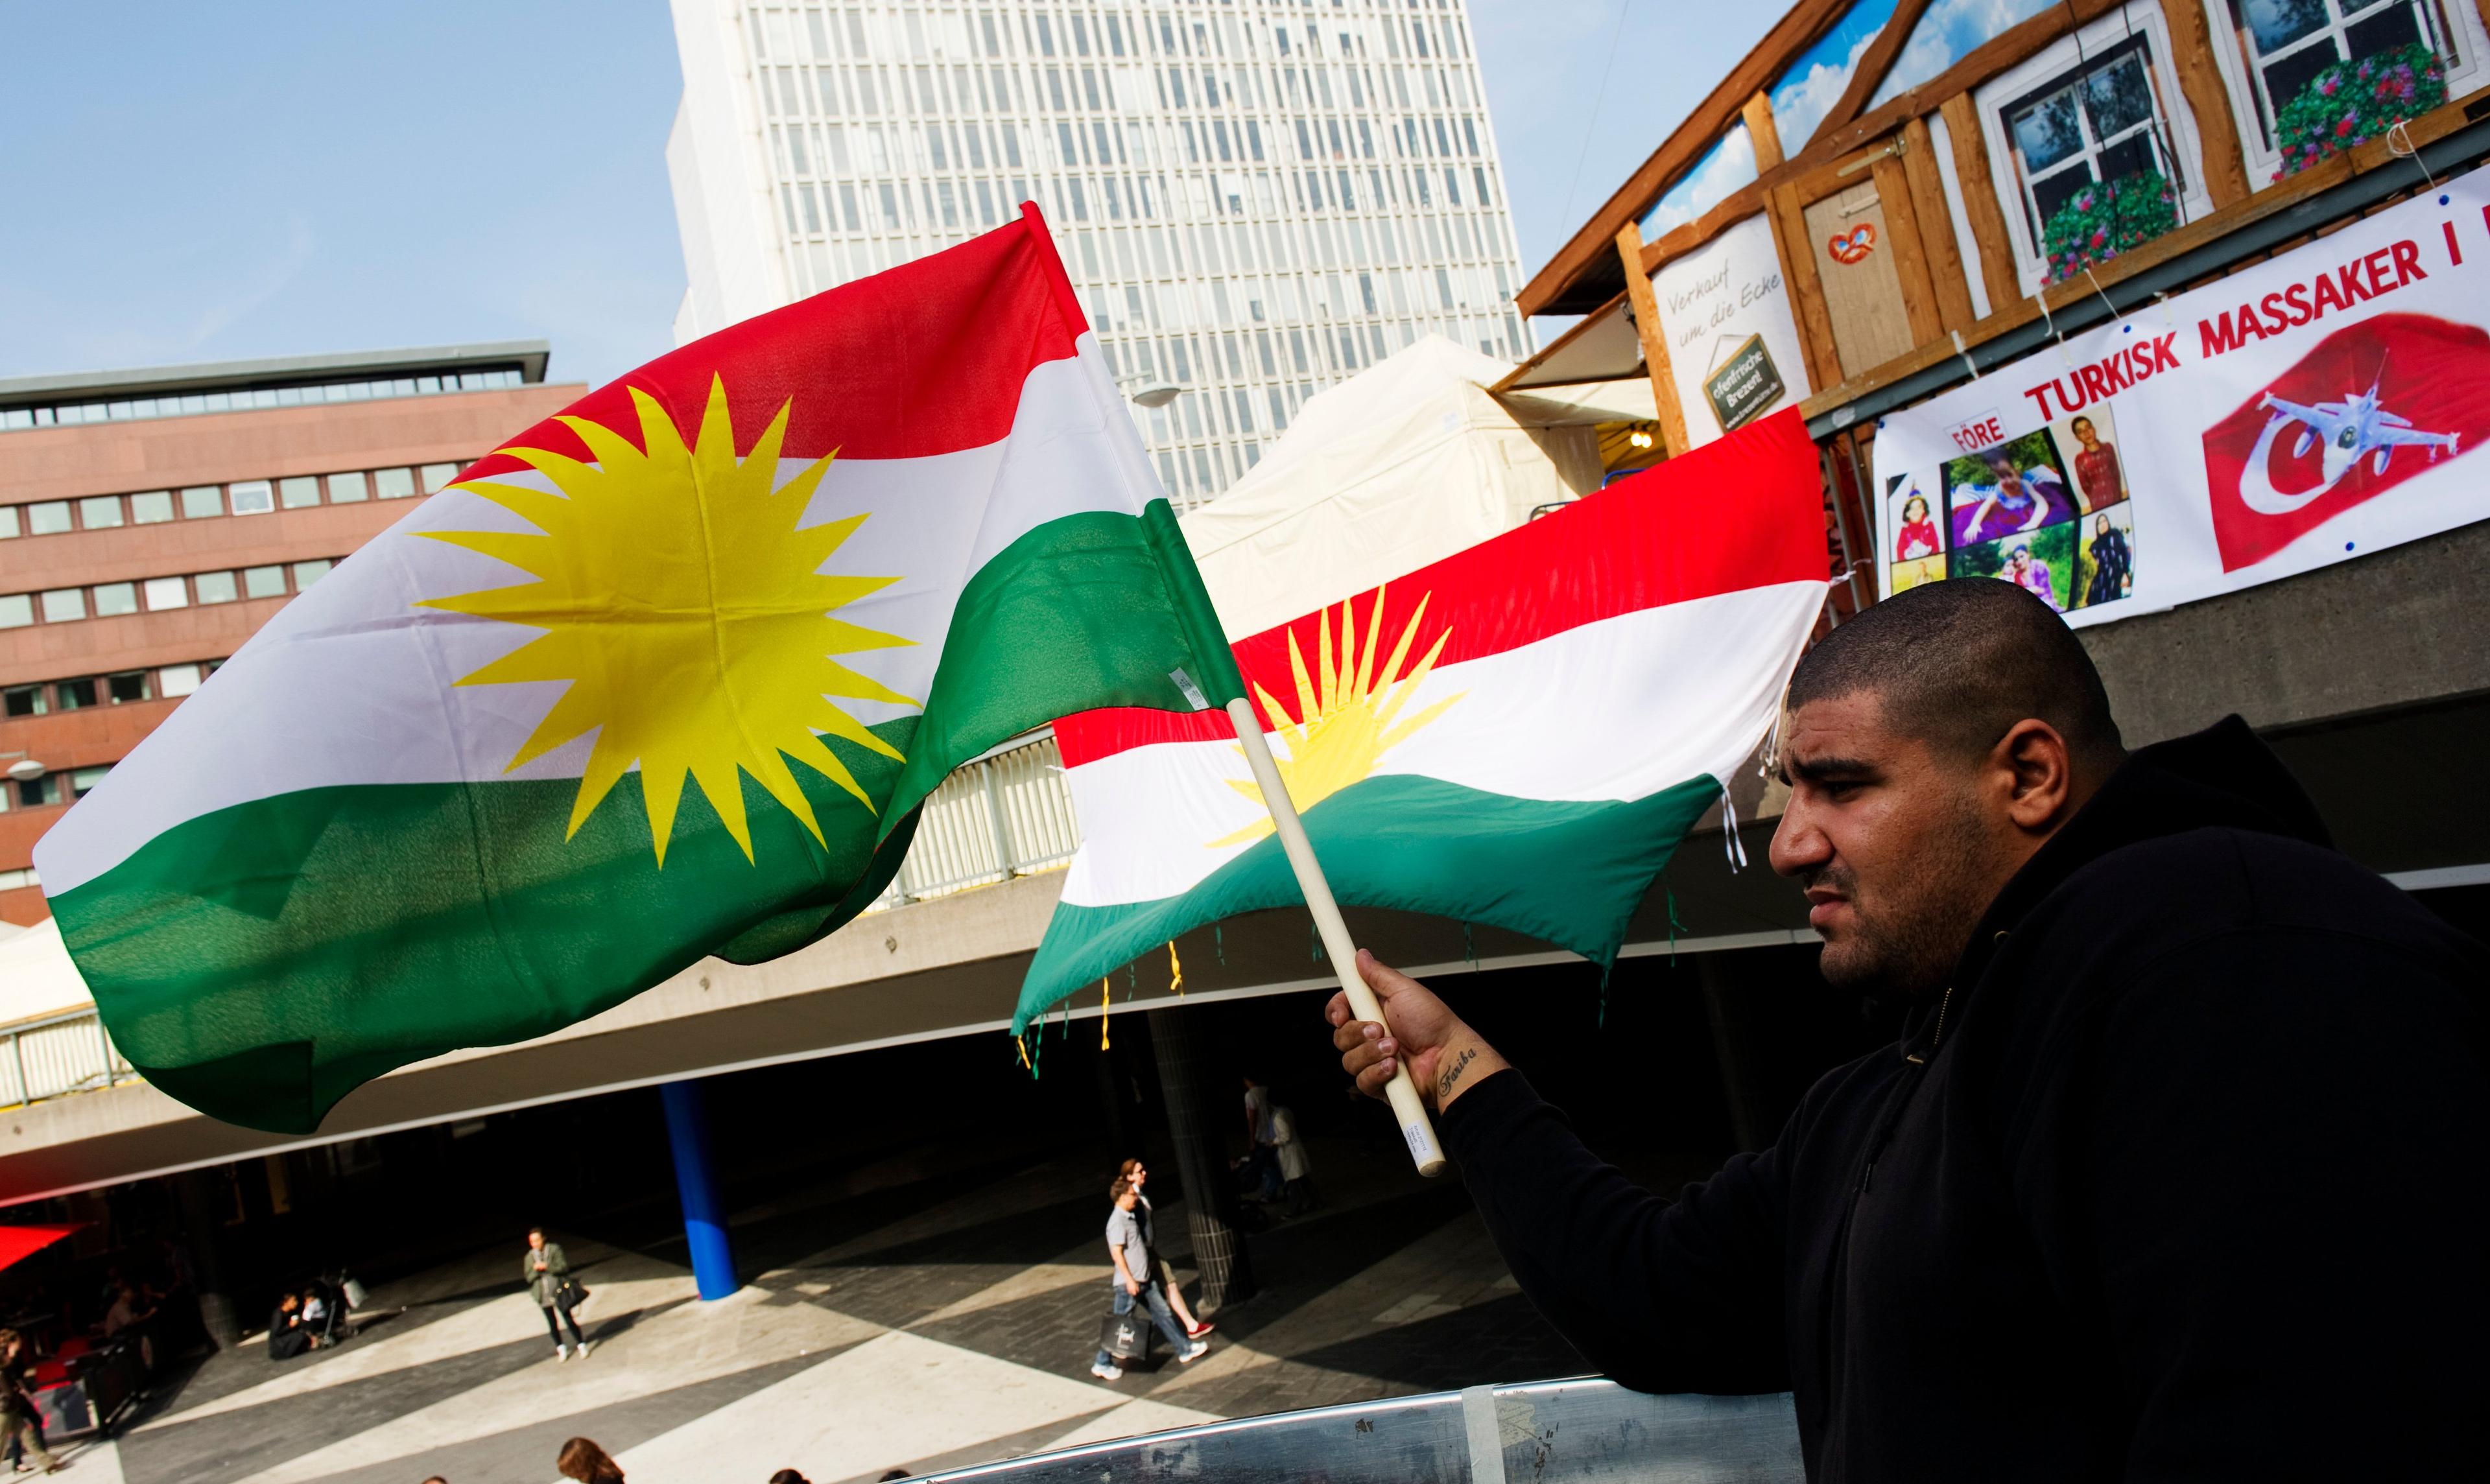 A man holds the Kurdish flag on September 4, 2011 during a demonstration in Stockholm against operations by Iran and Turkey against Kurdish separatist rebels in Iraq. AFP PHOTO /JONATHAN NACKSTRAND (Photo by Jonathan NACKSTRAND / AFP)